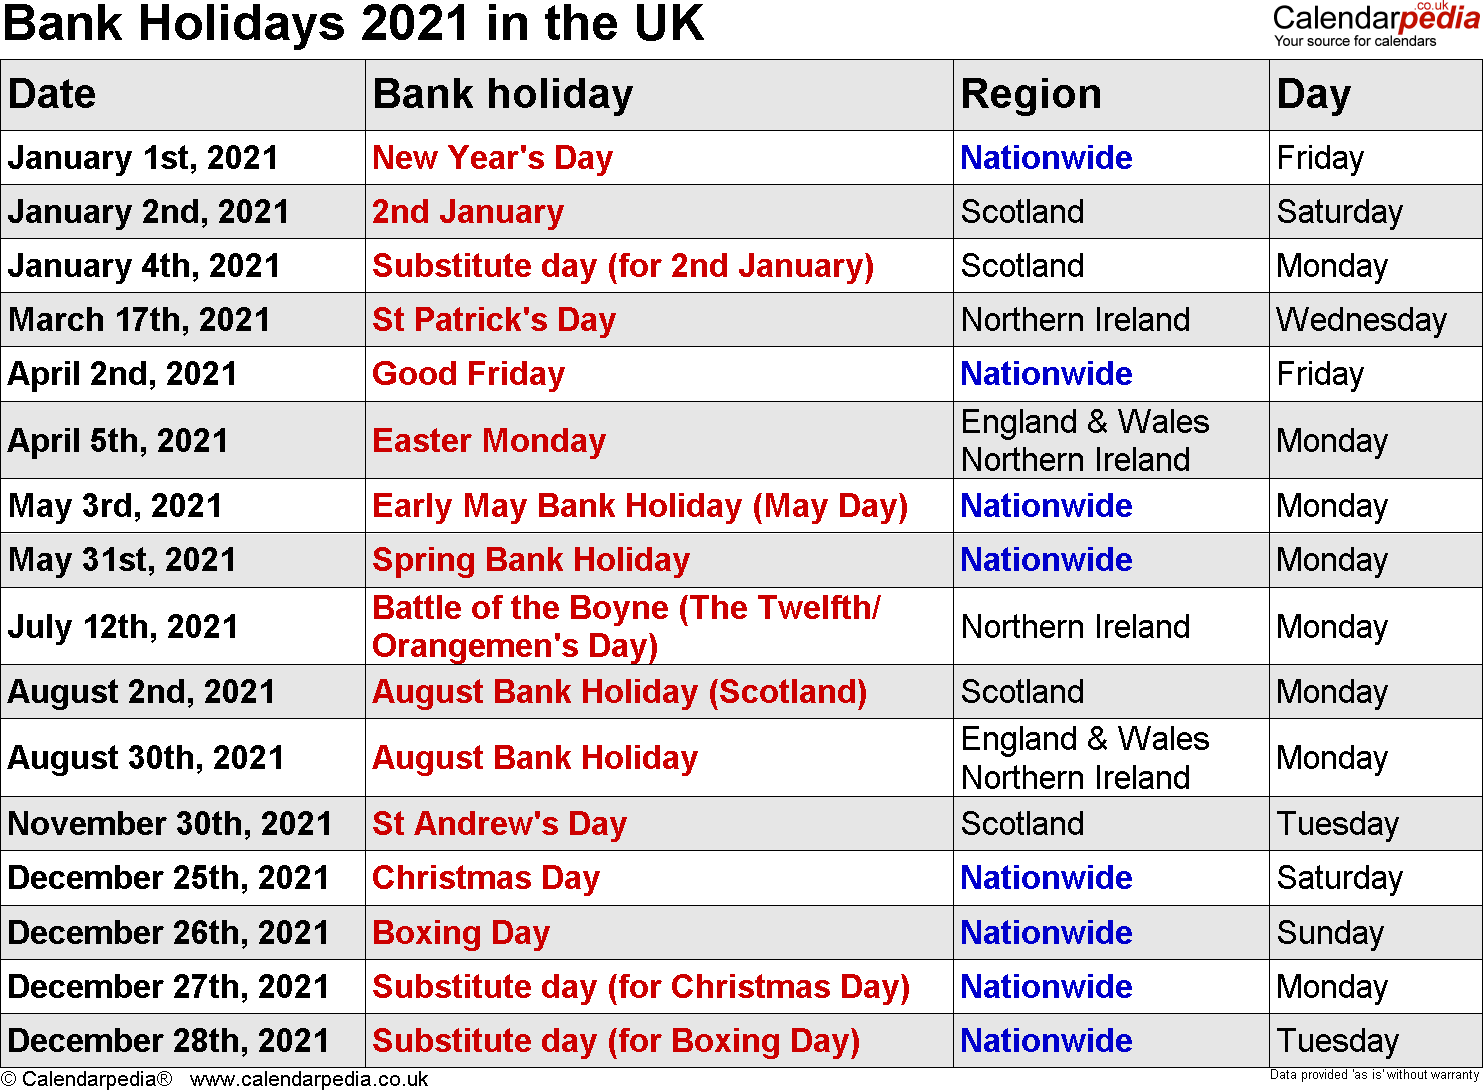 Bank Holidays 2021: When Are The Uk Bank Holidays This Year?